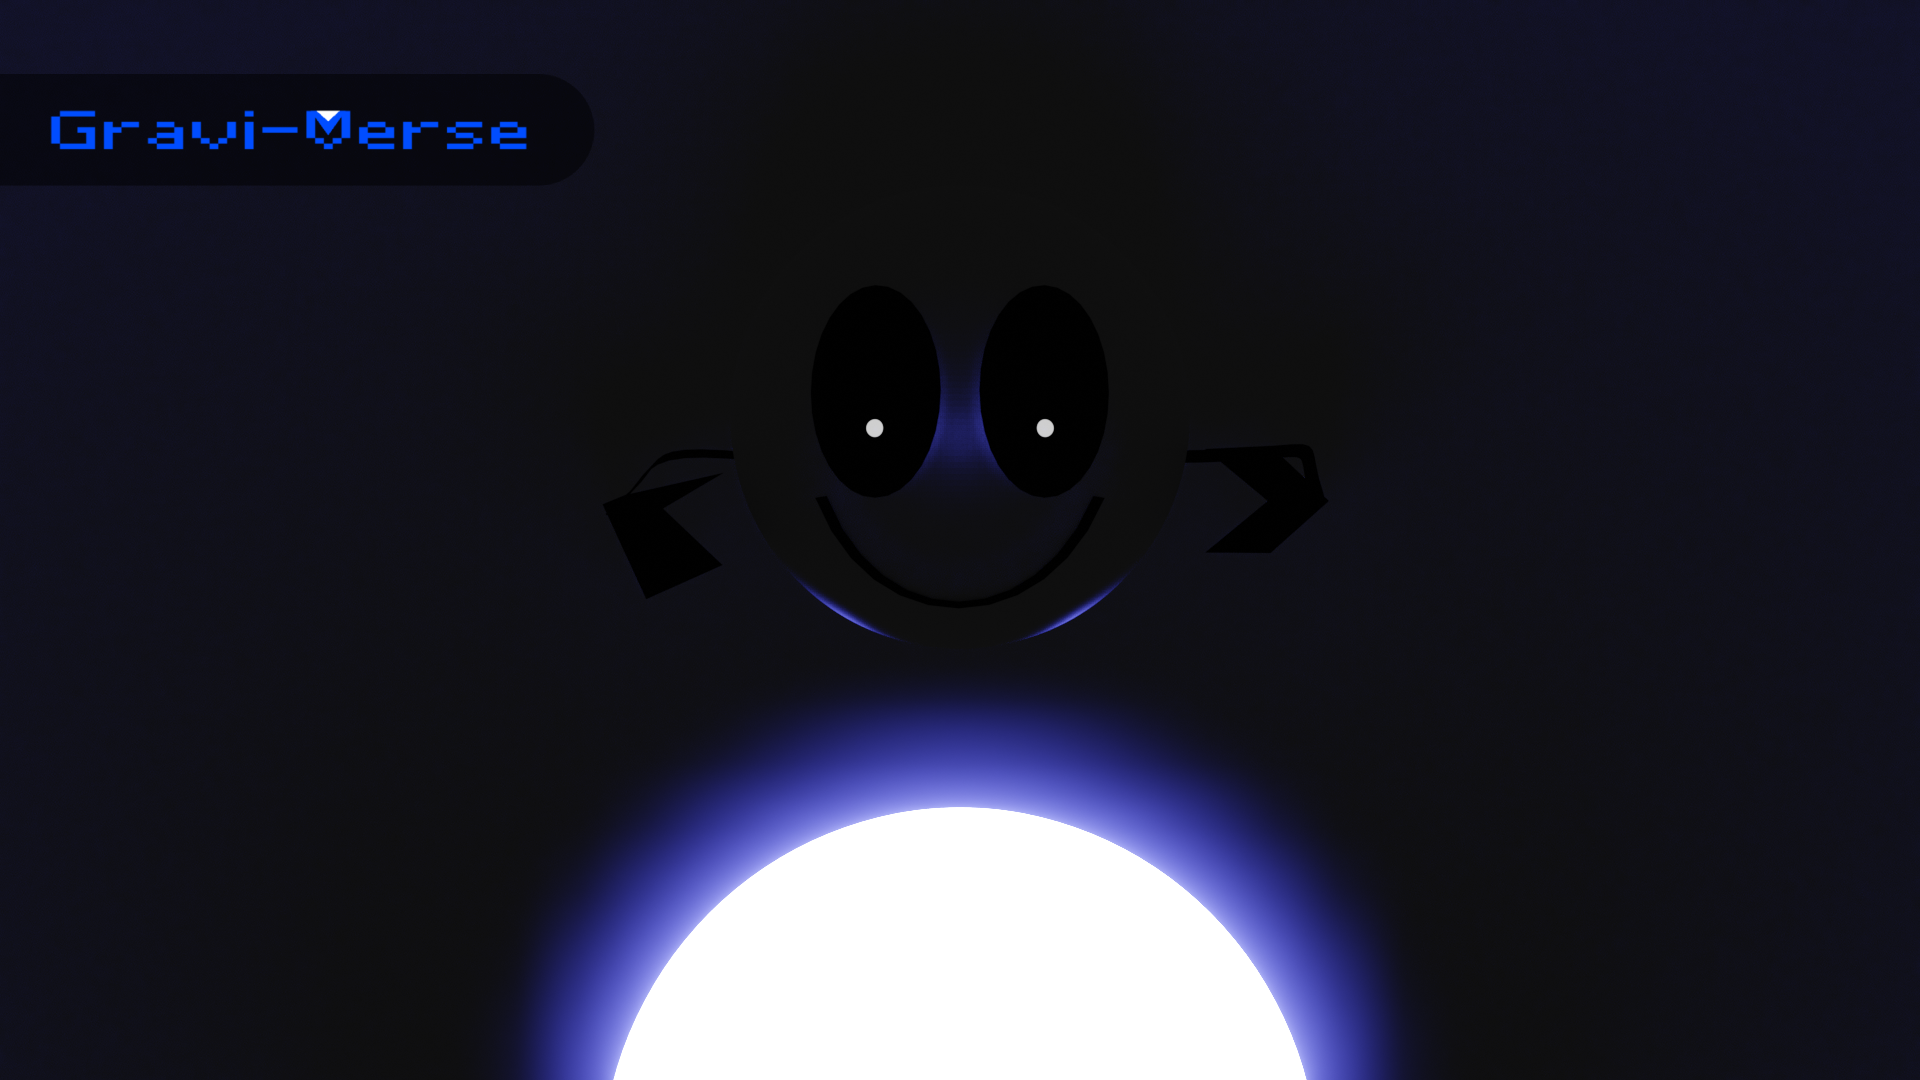 A Lighteye enemy looking intently at a shining orb in front of it